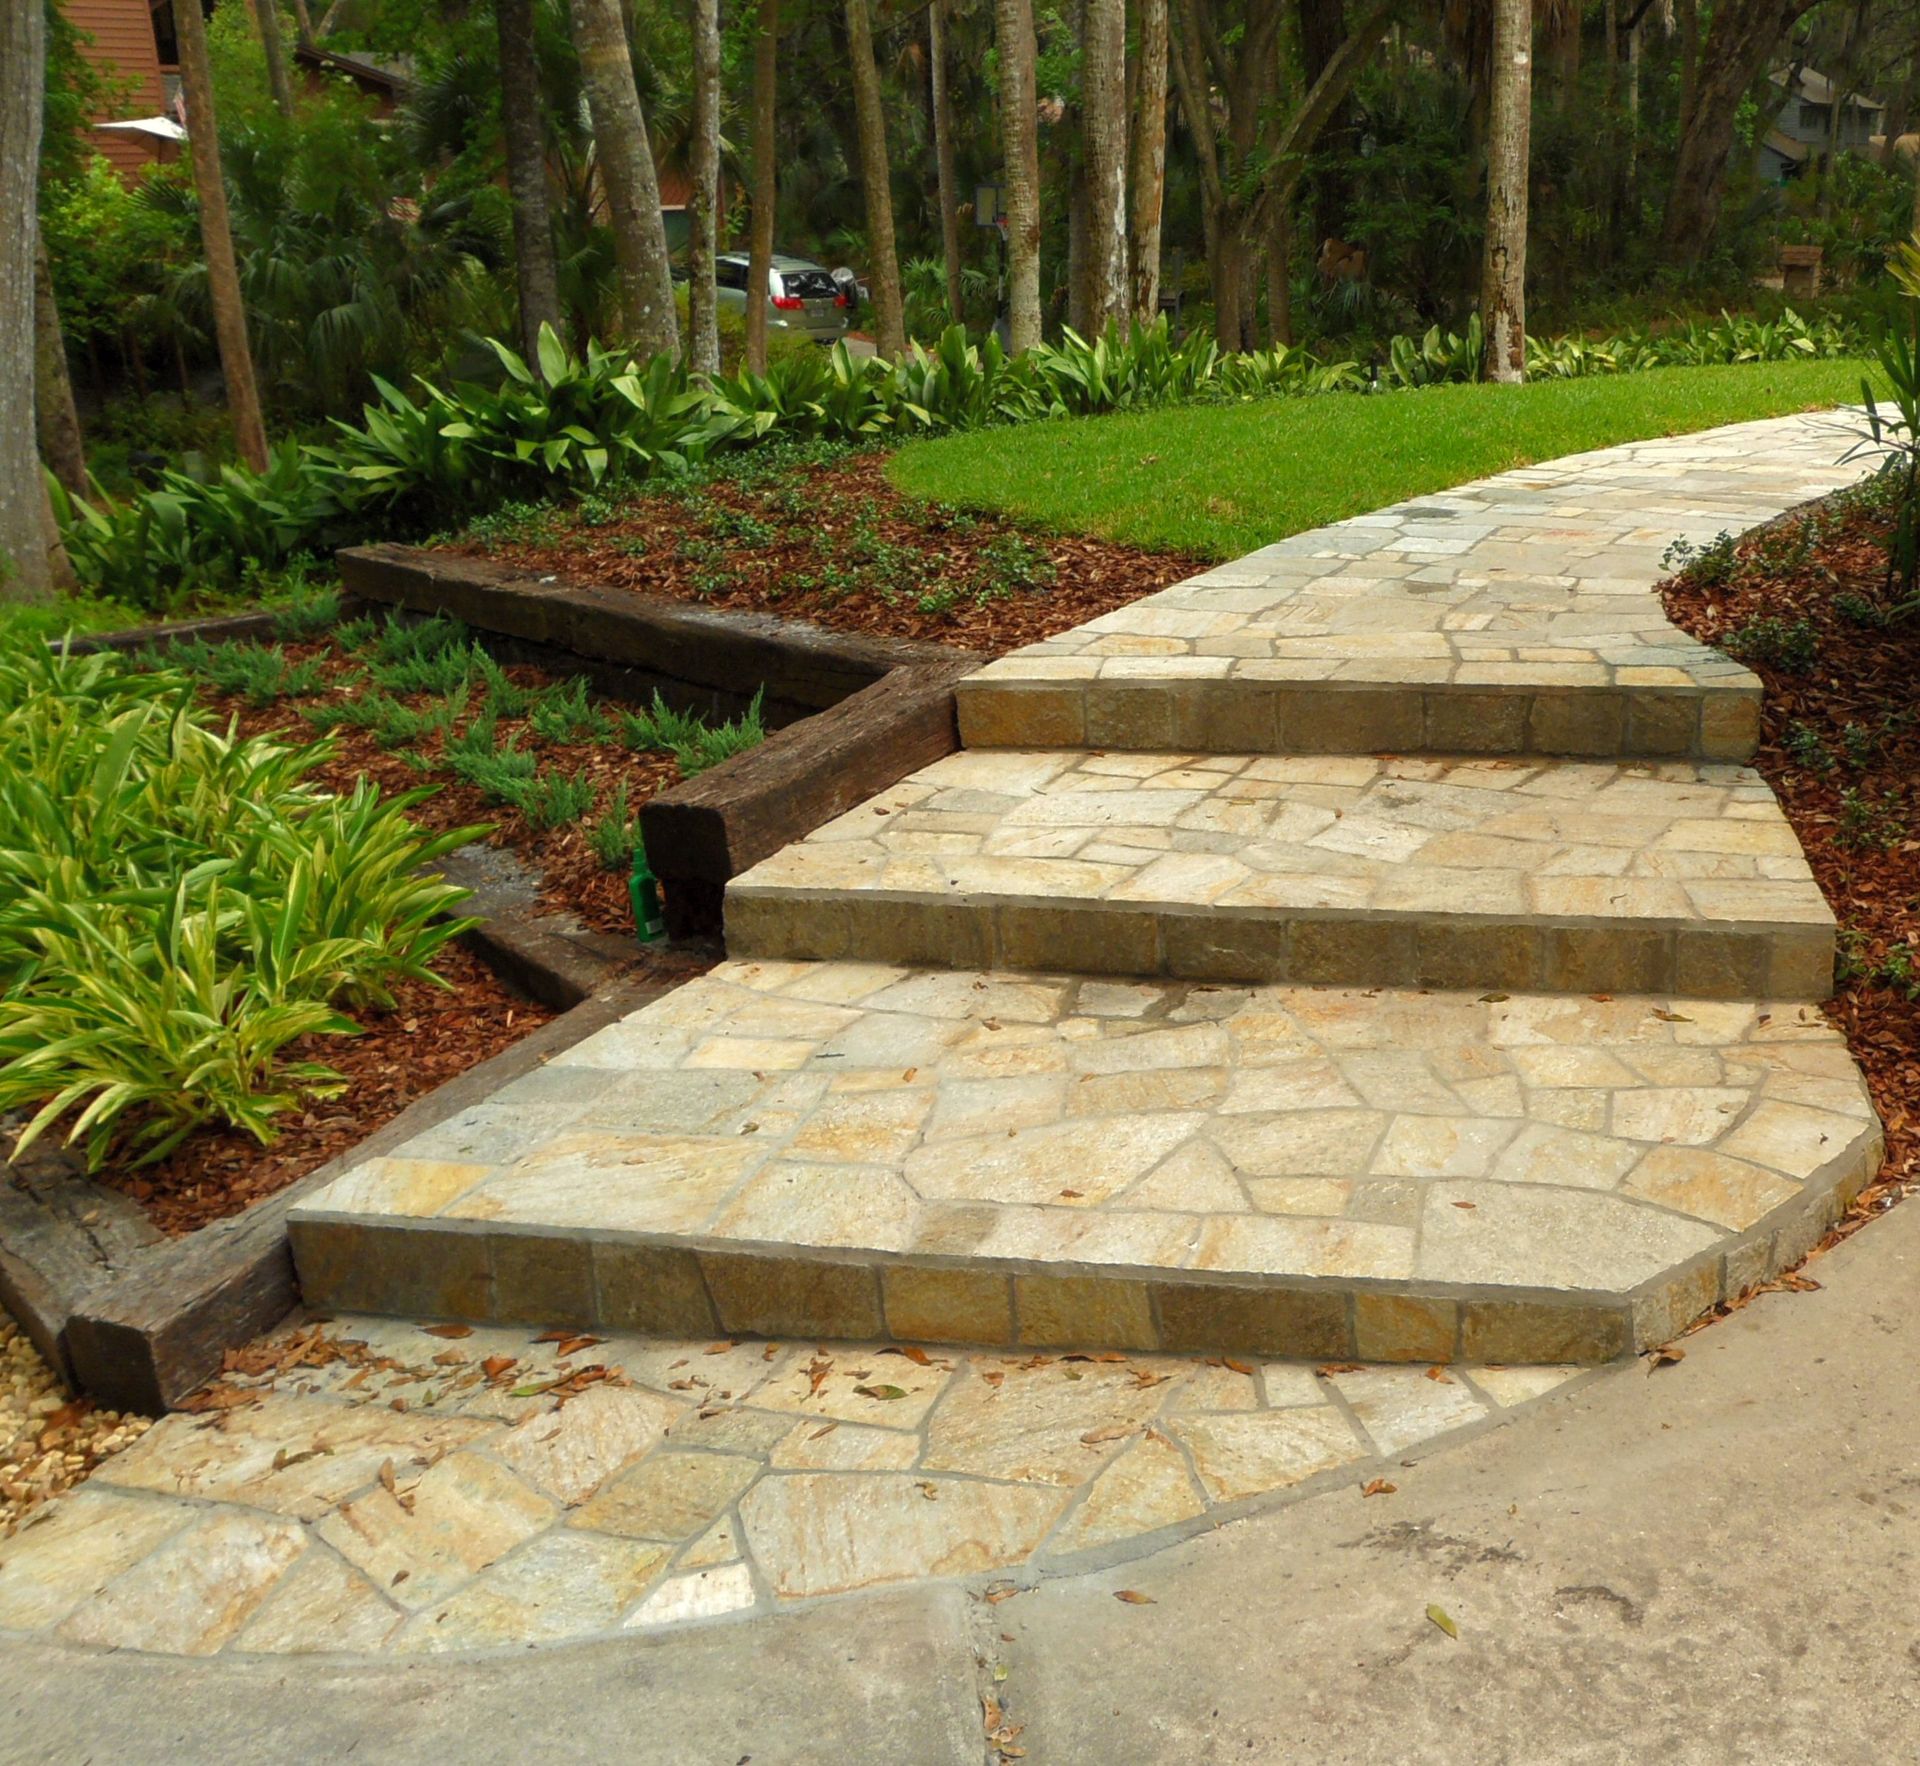 hardscape, paver, pavers, patio, paver patio, paver patios, driveway, paver driveway, paver driveways, walkway, paver walkway, paver landscaping, stone steps, paver steps, pool deck, paver pool deck, paver pool decking, pool coping, natural stone, stone, stacked stone, veneer, stone veneer, flagstone, bluestone, thermal bluestone, spa design, pool deck design, outdoor kitchen, summer kitchen, fire pit, firepit, sitting wall, pergola, hand-made pergola, seating area, outdoor living, outdoor entertaining, paver contractor, paver design, paver install, paver installation, paver expert, paver experts, warranty, labor warranty, expert installation, expert install, licensed and insured, licensed, insured, licensed insured, award winning designs, Angie's List Super Service Award, Angie's List Award, customer reviews, excellent reputation, reputation, fireplace, fireplace renovation, stone fireplace, fireplace veneer, fireplace reconstruction, before and after pictures, years experience, experienced, Jacksonville, Ponte Vedra, Nocatee, Fleming Island, Queens Harbor, St. Johns, Fruit Cove, St. Augustine, Jacksonville pavers, paver driveway Jacksonville, Jacksonville paver driveway, Jacksonville driveway, paver patio Jacksonville, patio Jacksonville, Jacksonville paver patio, Jacksonville patio, Ponte Vedra pavers, paver driveway Ponte Vedra, driveway Ponte Vedra, Ponte Vedra paver driveway, Ponte Vedra driveway, paver patio Ponte Vedra, patio Ponte Vedra, Ponte Vedra paver patio, Ponte Vedra patio, Nocatee pavers, driveway Nocatee, paver driveway Nocatee, Nocatee driveway, Nocatee paver driveway, paver patio Nocatee, patio Nocatee, Nocatee paver patio, Nocatee patio, Sawgrass pavers, Sawgrass paver driveway, Sawgrass driveway, driveway Sawgrass, paver driveway Sawgrass, paver patio Sawgrass, patio Sawgrass, Sawgrass patio, Sawgrass paver patio, Fleming Island pavers, Fleming Island paver driveway, paver driveway Fleming Island, Fleming Island driveway, driveway Fleming Island, paver patio Fleming Island, Fleming Island paver patio, patio Fleming Island, Fleming Island patio, Queens Harbor pavers, paver driveway Queens Harbor, Queens Harbor paver driveway, Queens Harbor driveway, driveway Queens Harbor, paver patio Queens Harbor, Queens Harbor paver patio, patio Queens Harbor, Queens Harbor patio, St. Johns pavers, St. Johns paver driveway, paver driveway St. Johns, St. Johns driveway, driveway St. Johns, St. Johns paver patio, paver patio St. Johns, patio St. Johns, St. Johns patio, Fruit Cove pavers, paver driveway Fruit Cove, Fruit Cove paver driveway, driveway Fruit Cove, Fruit Cove driveway, Fruit Cove paver patio, paver patio Fruit Cove, patio Fruit Cove, Fruit Cove patio, St. Augustine pavers, paver driveway St. Augustine, St. Augustine paver driveway, driveway St. Augustine, St. Augustine driveway, St. Augustine patio, patio St Augustine, St. Augustine paver patio, paver patio St. Augustine, Mandarin pavers, Mandarin paver driveway, paver driveway Mandarin, driveway Mandarin, Mandarin driveway, paver patio Mandarin, Mandarin paver patio, patio Mandarin, Mandarin patio, garden stone, garden stones, garden path, garden walkway